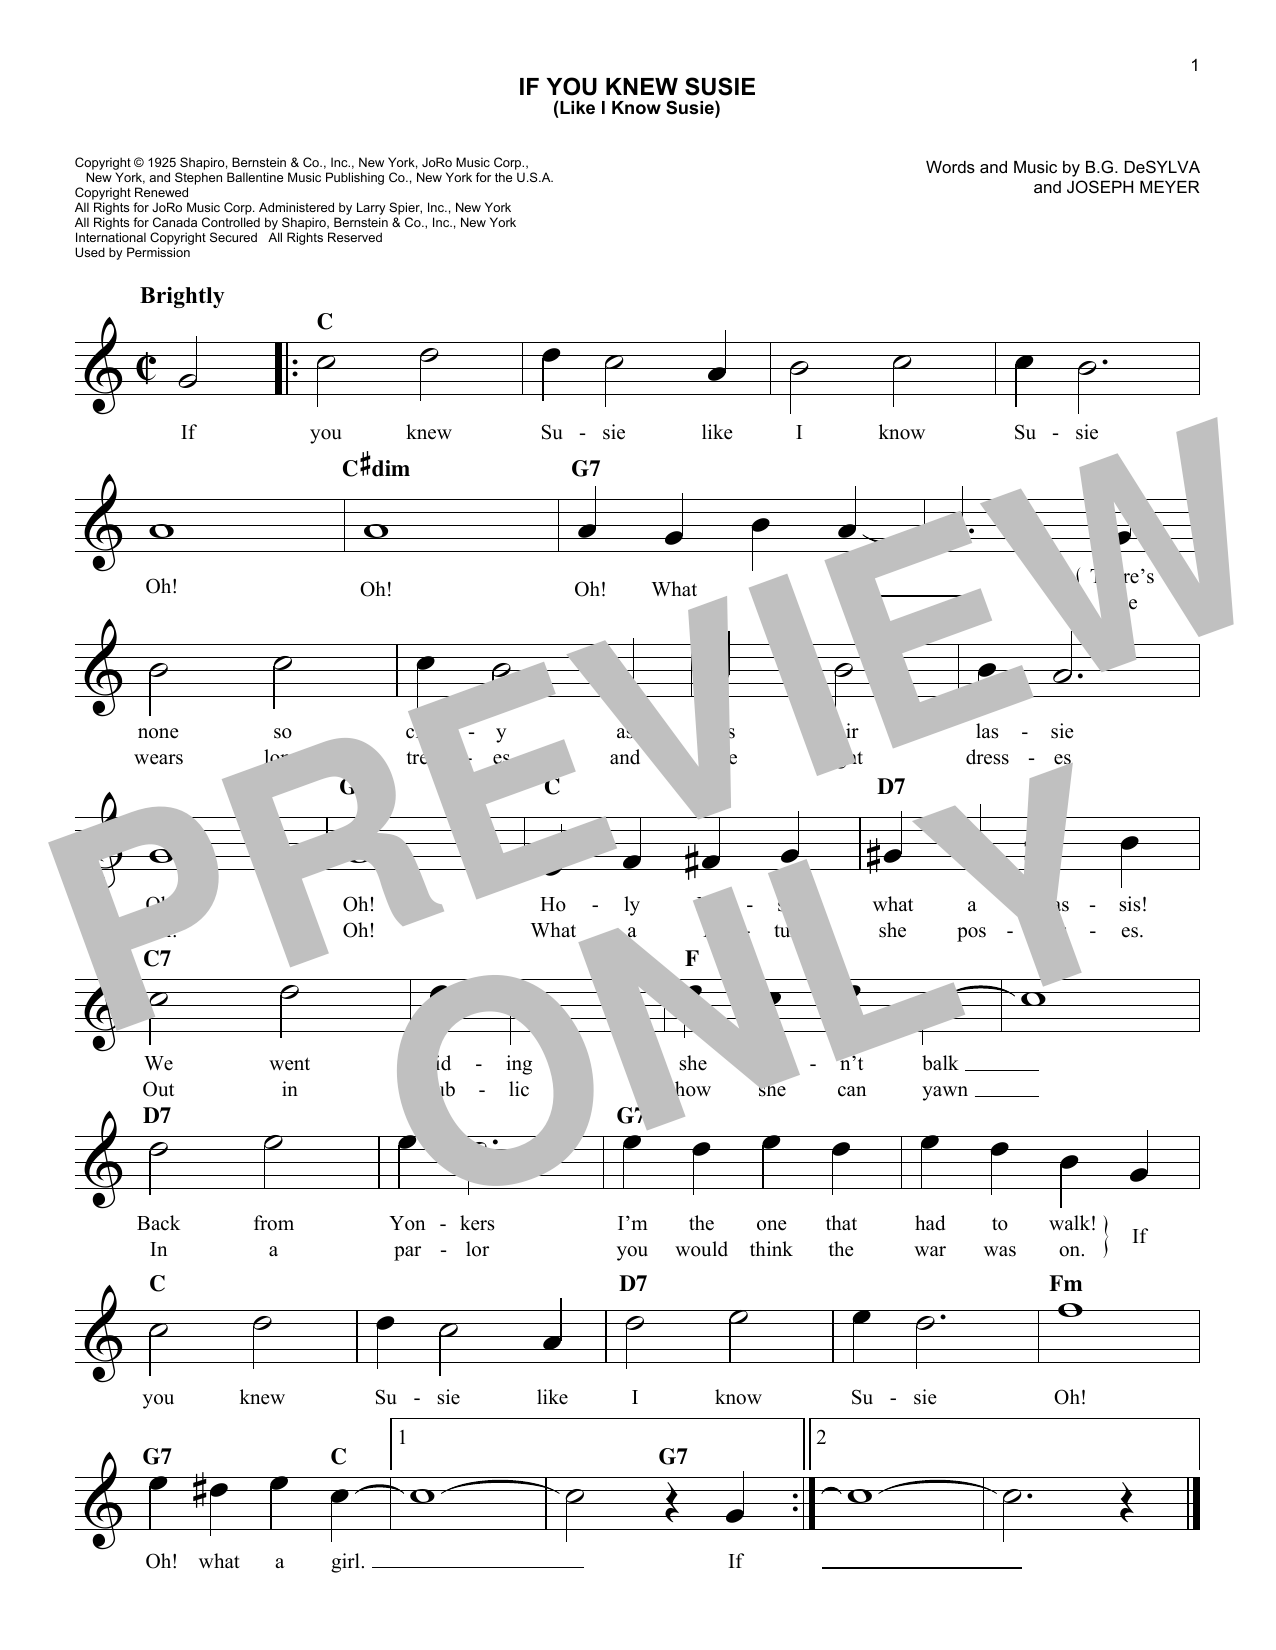 Buddy DeSylva If You Knew Susie (Like I Know Susie) sheet music notes and chords. Download Printable PDF.